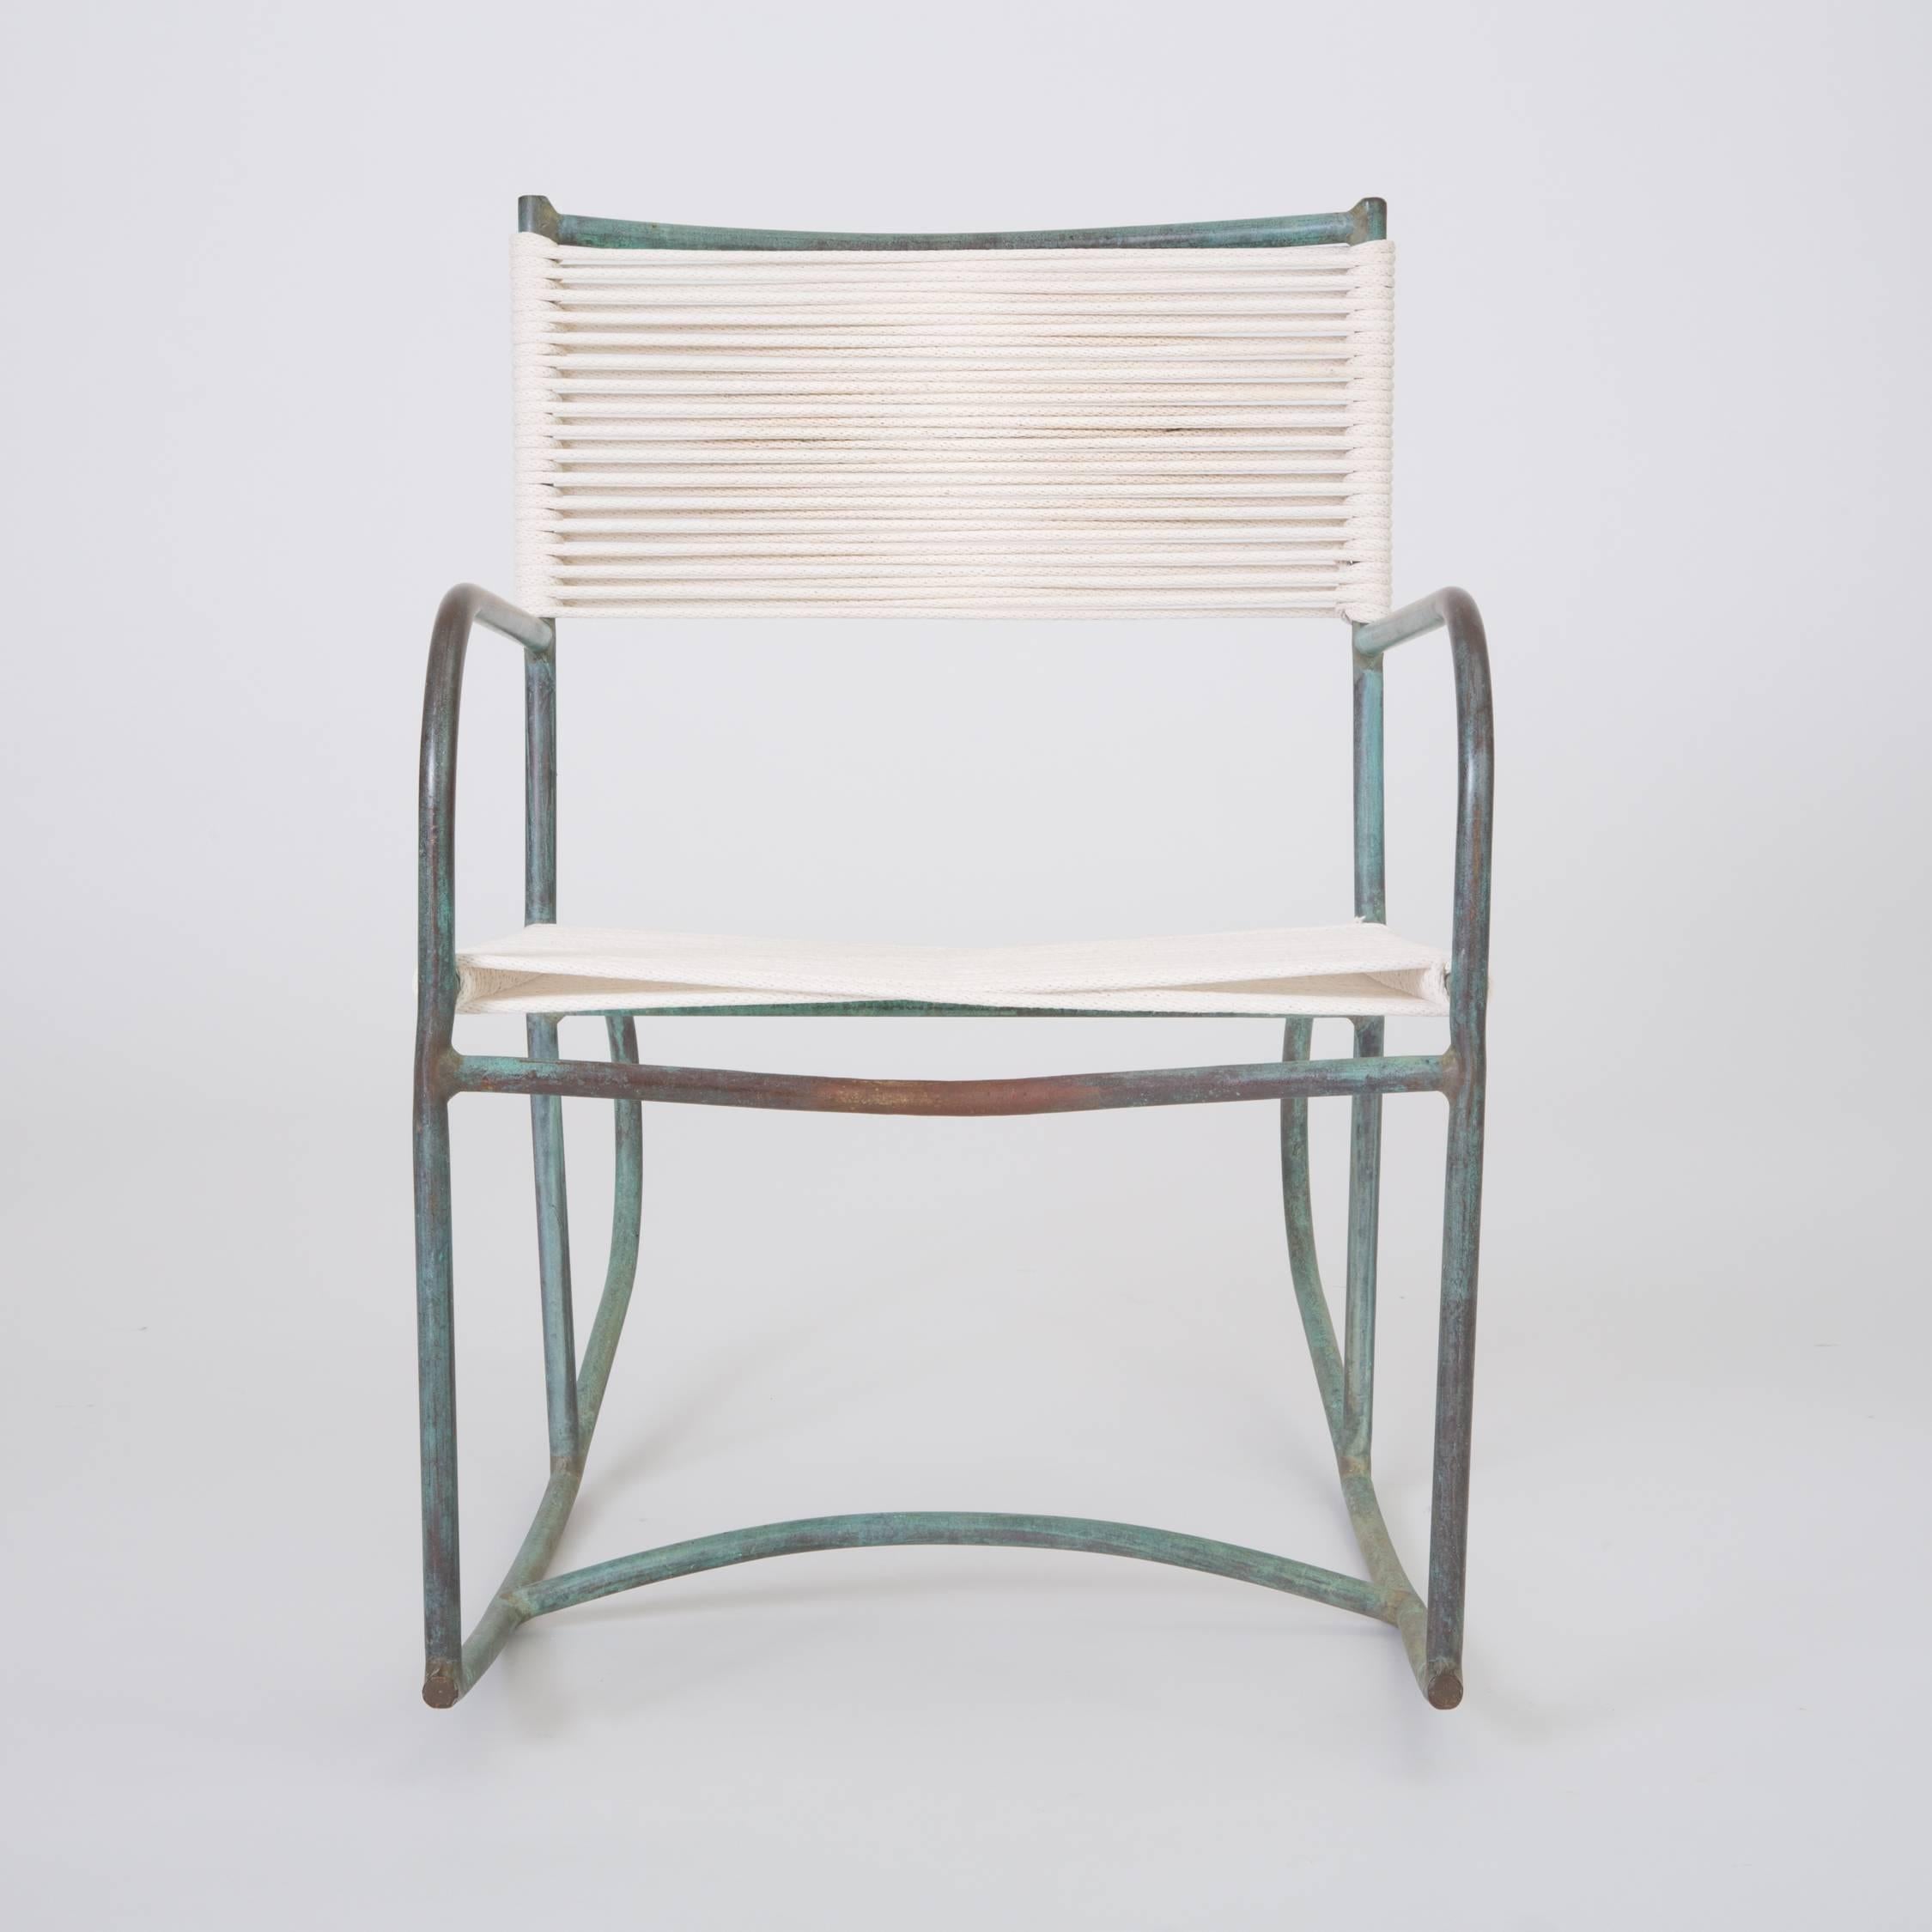 A late 1940s or early 1950s Walter Lamb rocking chair predating or from the early days of his partnership with Brown Jordan. The chair has a frame in tubular bronze with the verdigris patina that distinguishes his designs. Two runners with bowed